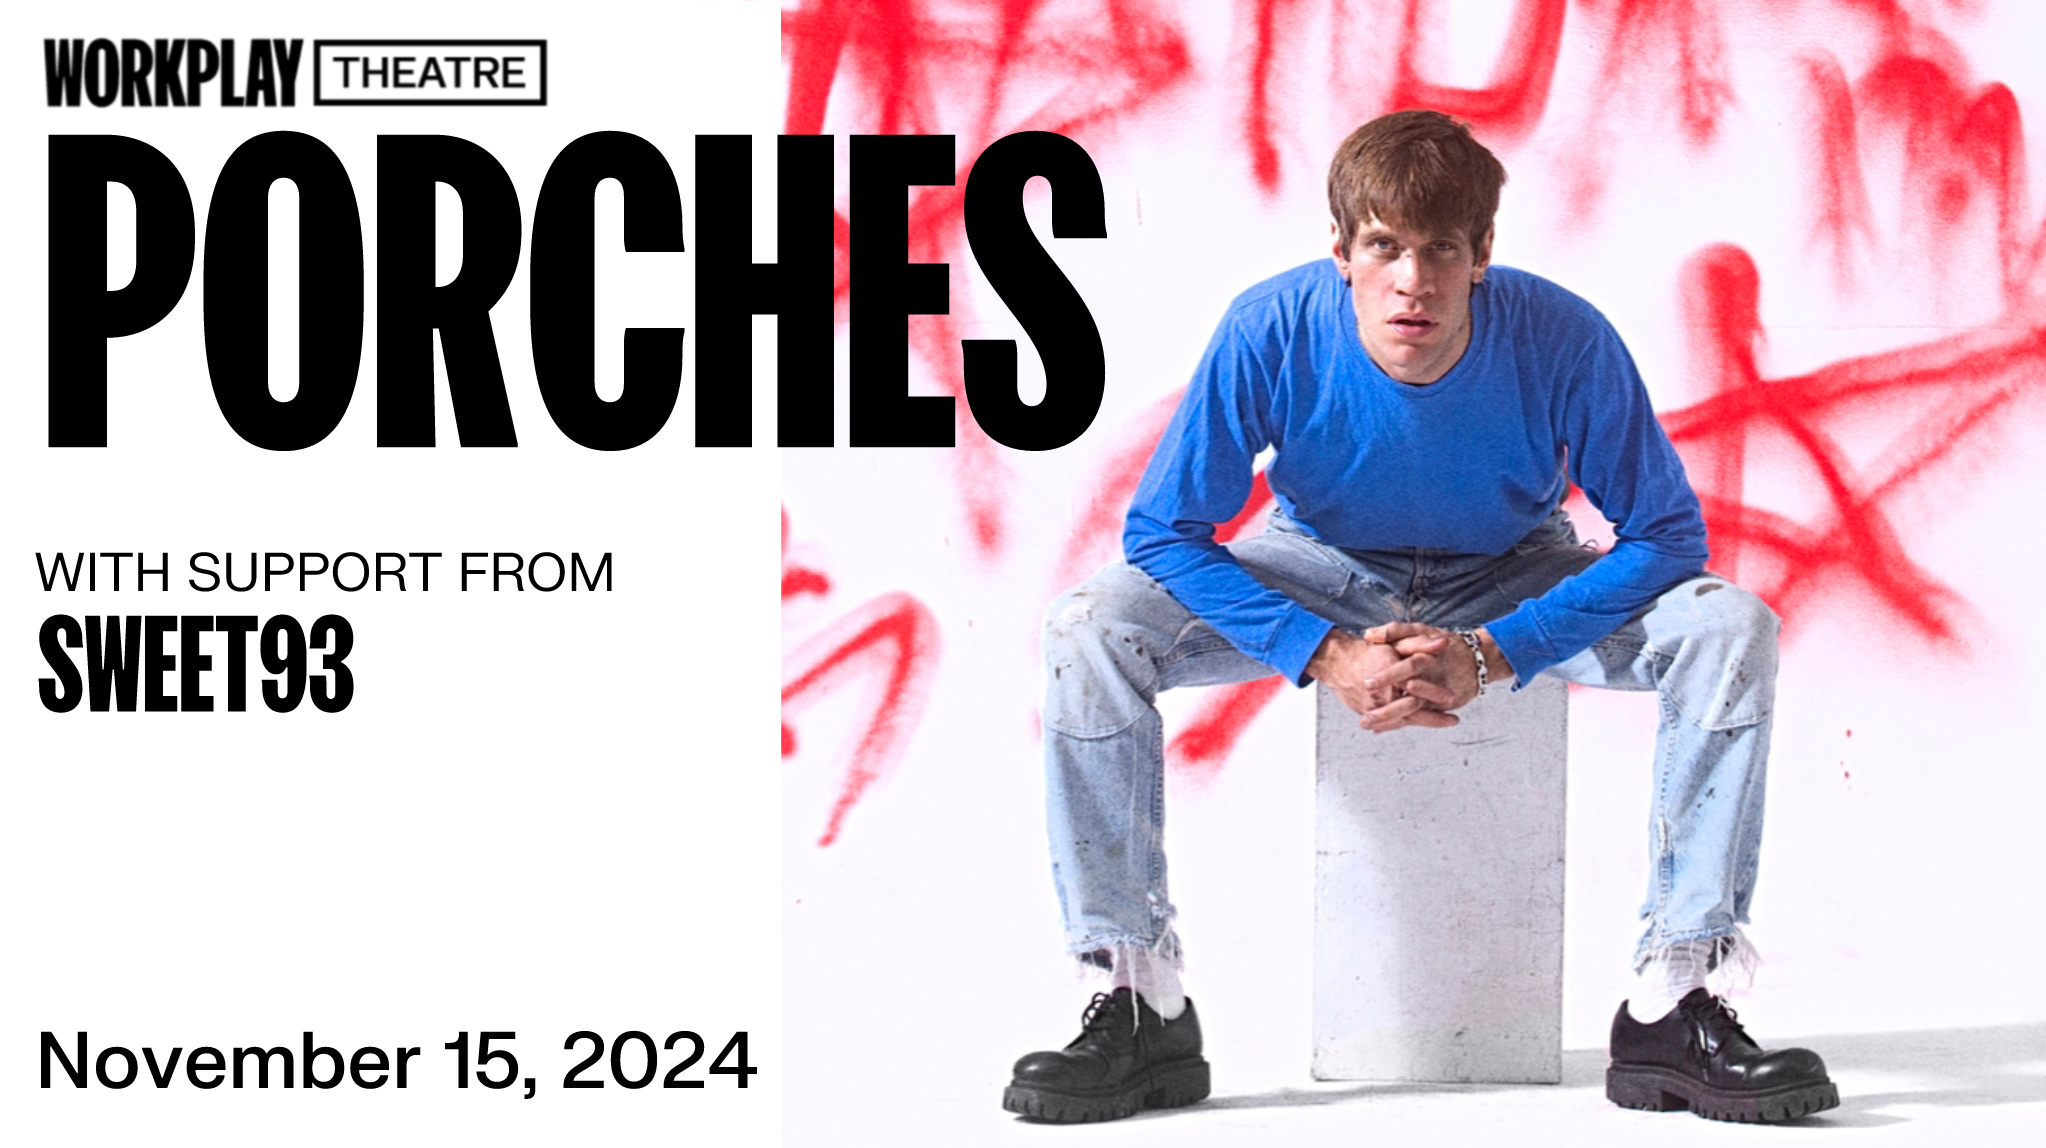 Porches in concert